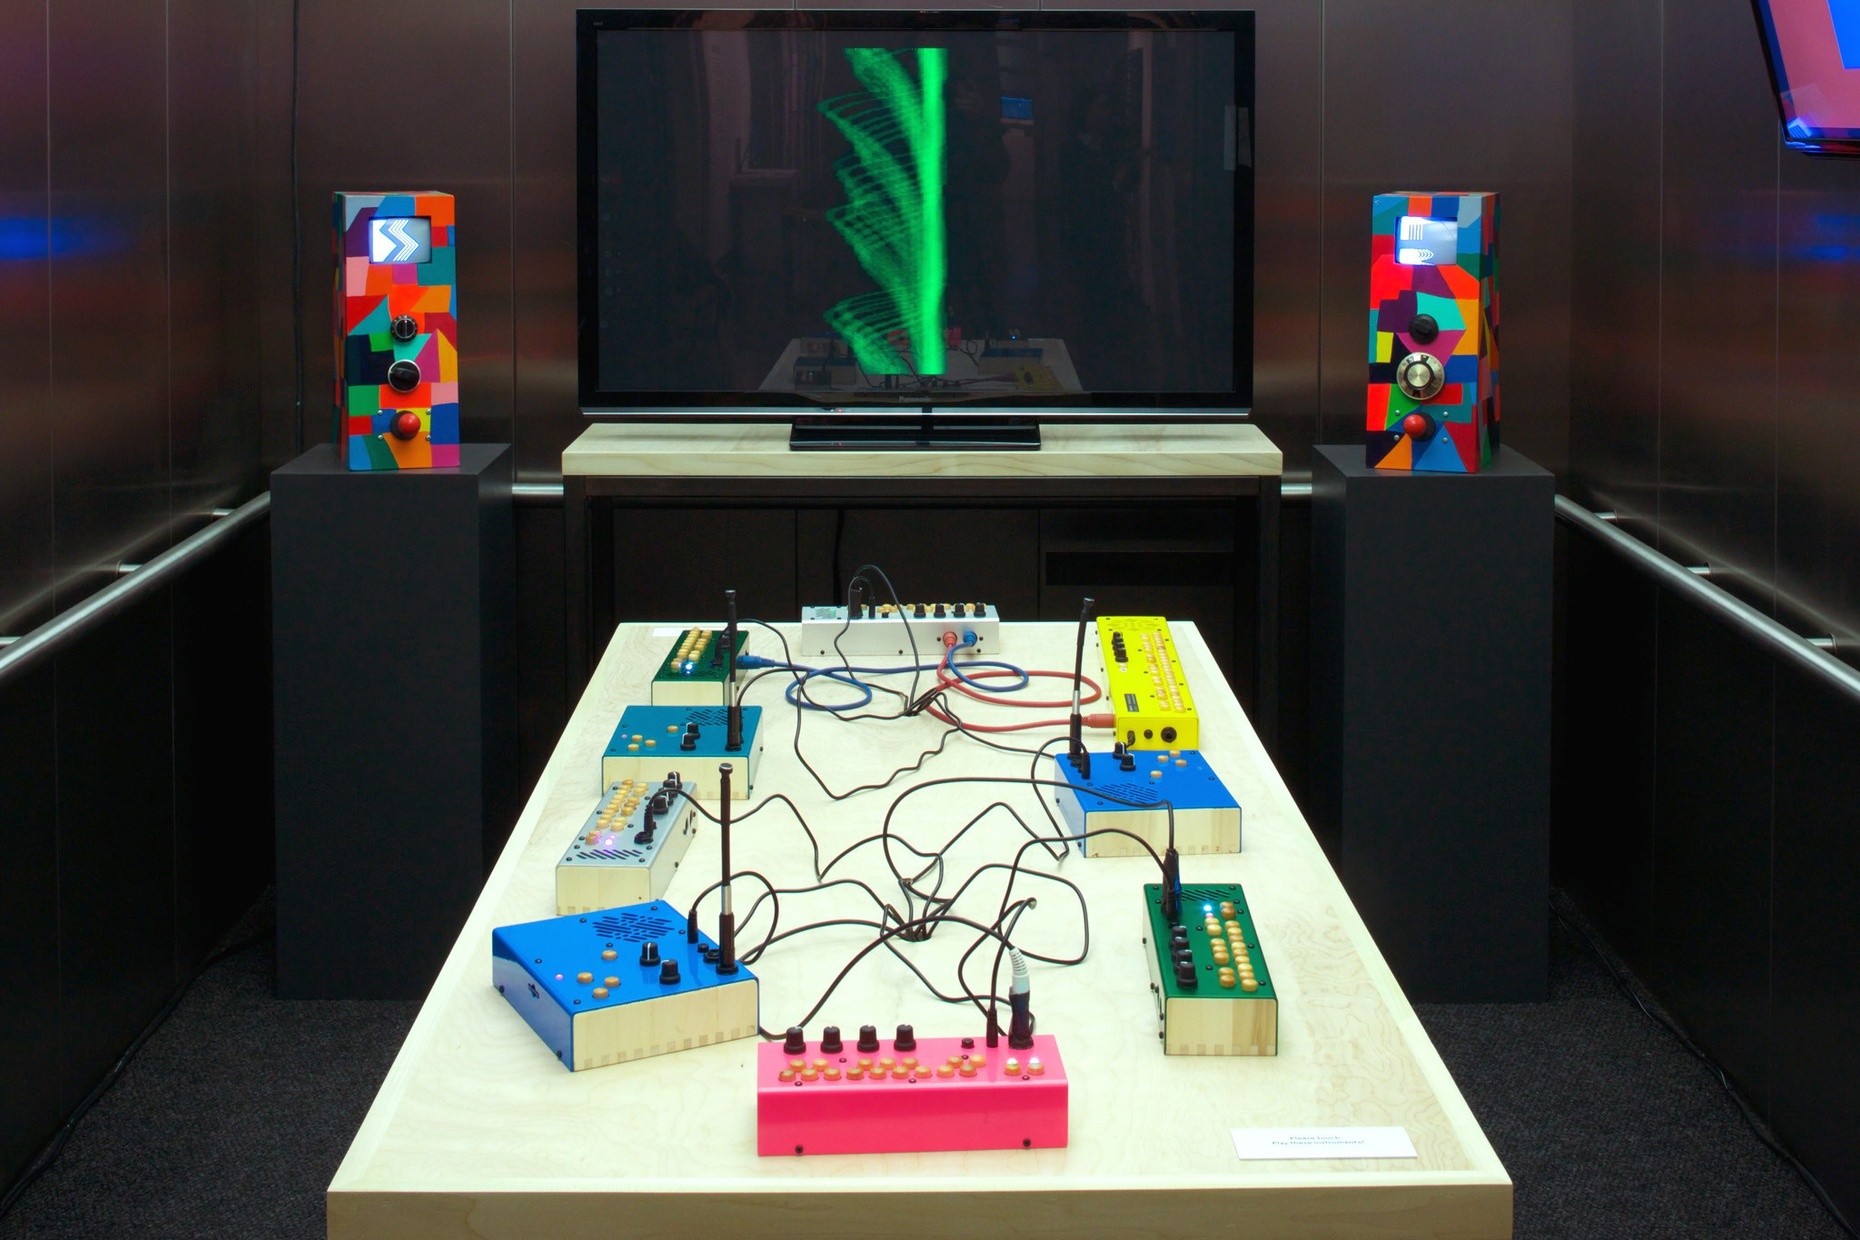 Colorful sound boxes connected by circuit wires rest on a white table in front of a TV and two abstractly colored speakers.